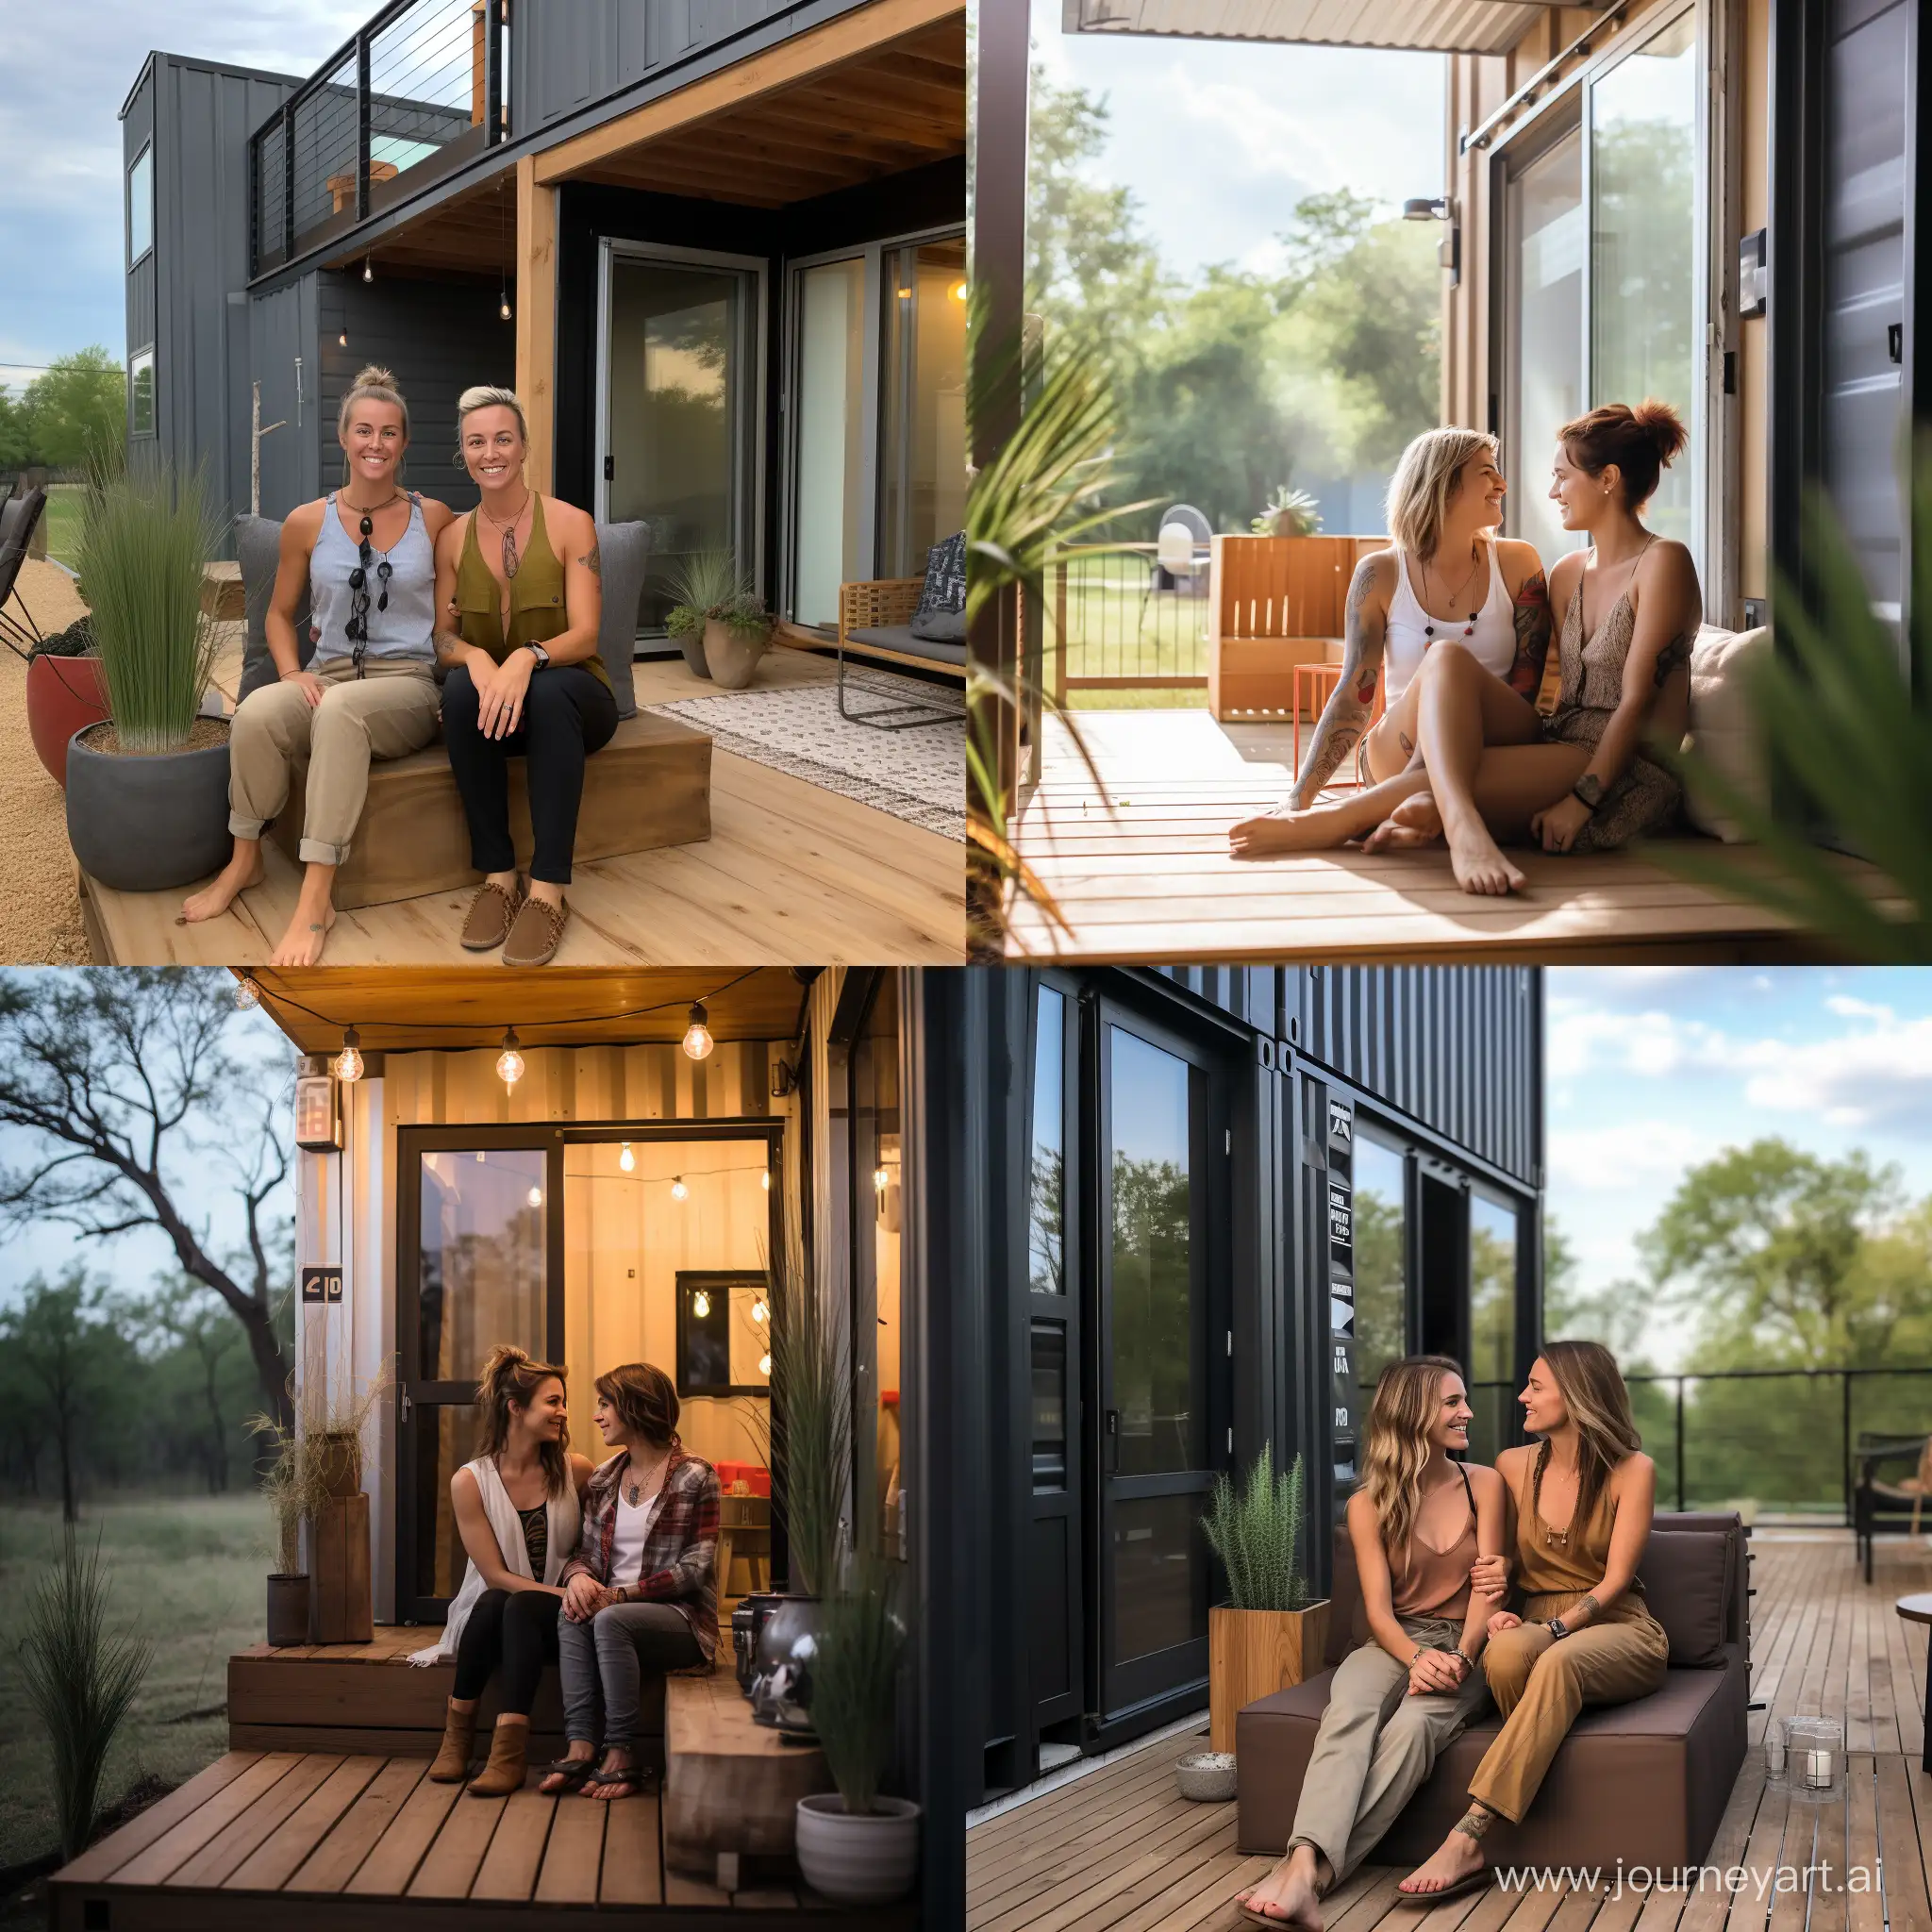 Lesbian architect couple in porch of modern container home